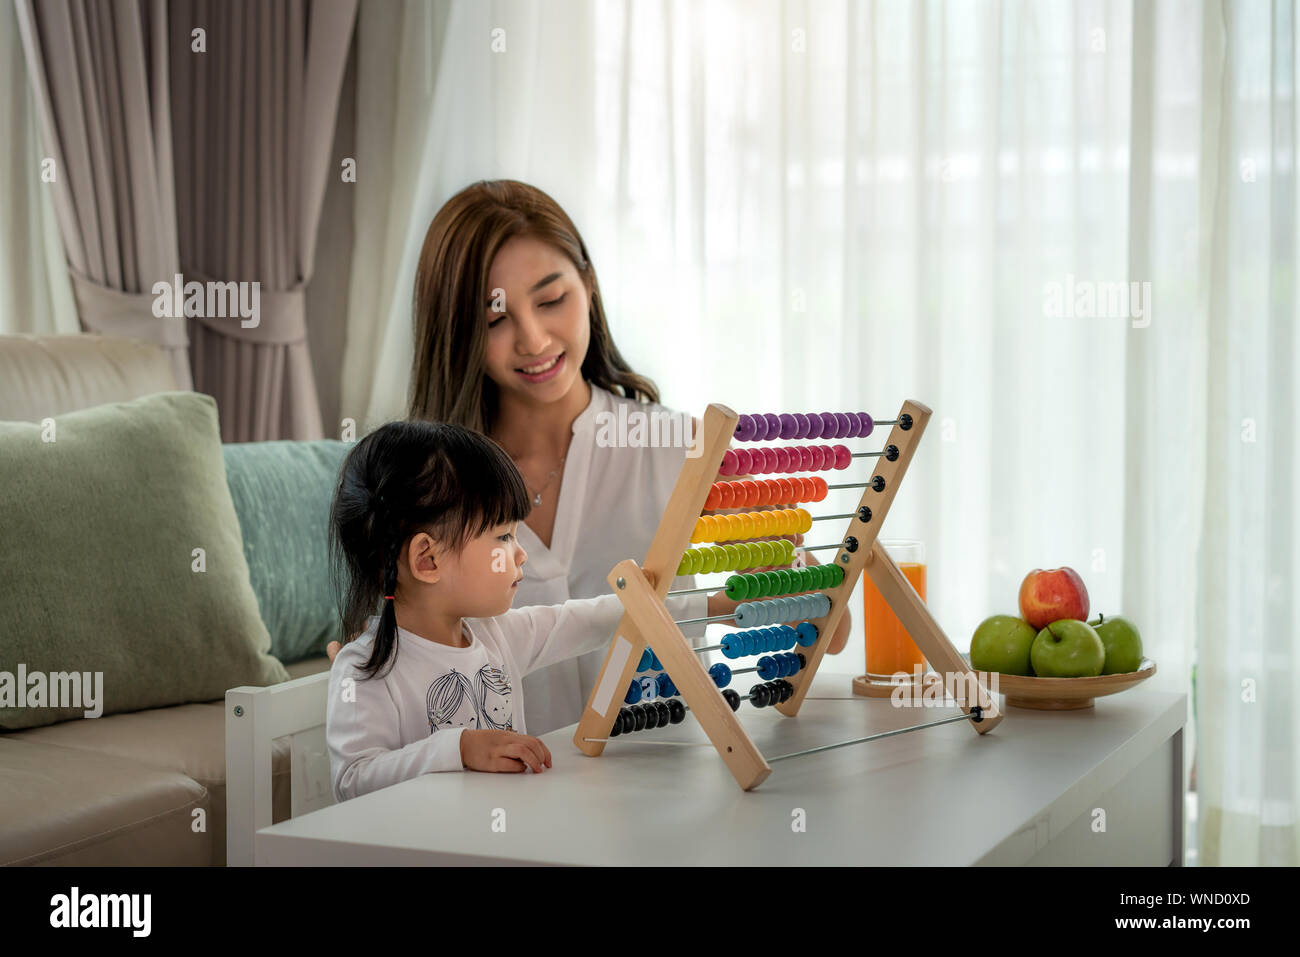 Happy Asian young mother and daughter playing with abacus, early education at home. Stock Photo